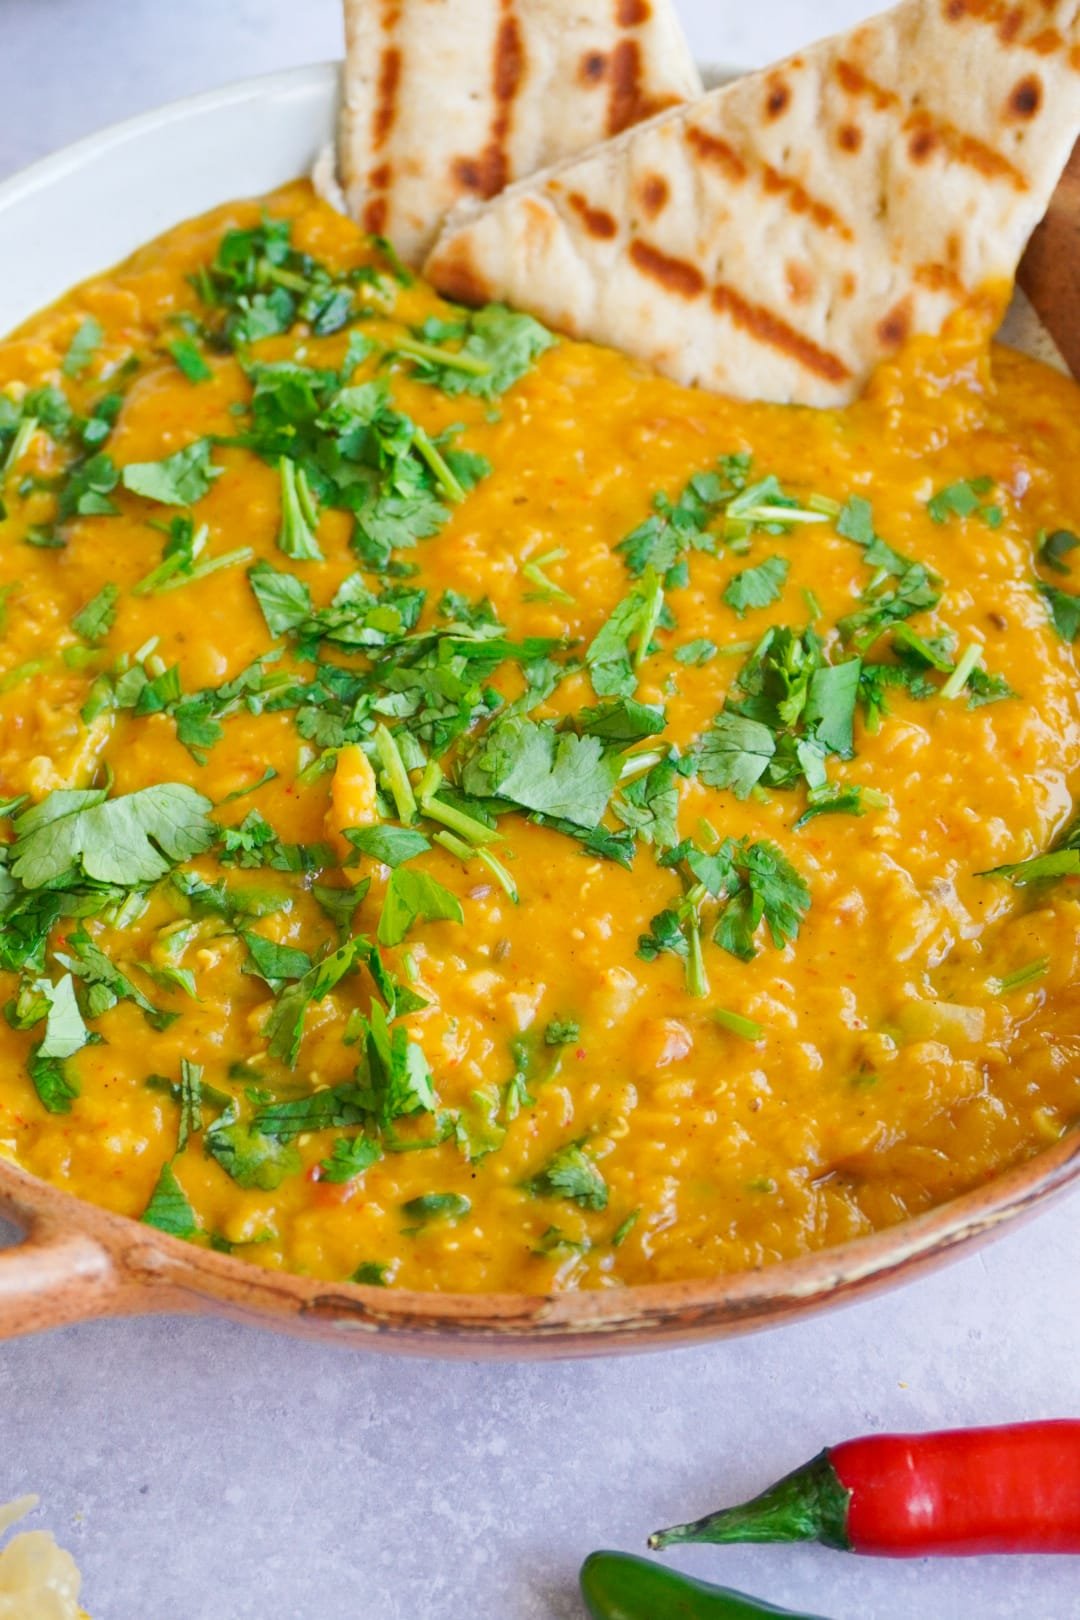 Finally, the delicious dal tadka is ready to be served